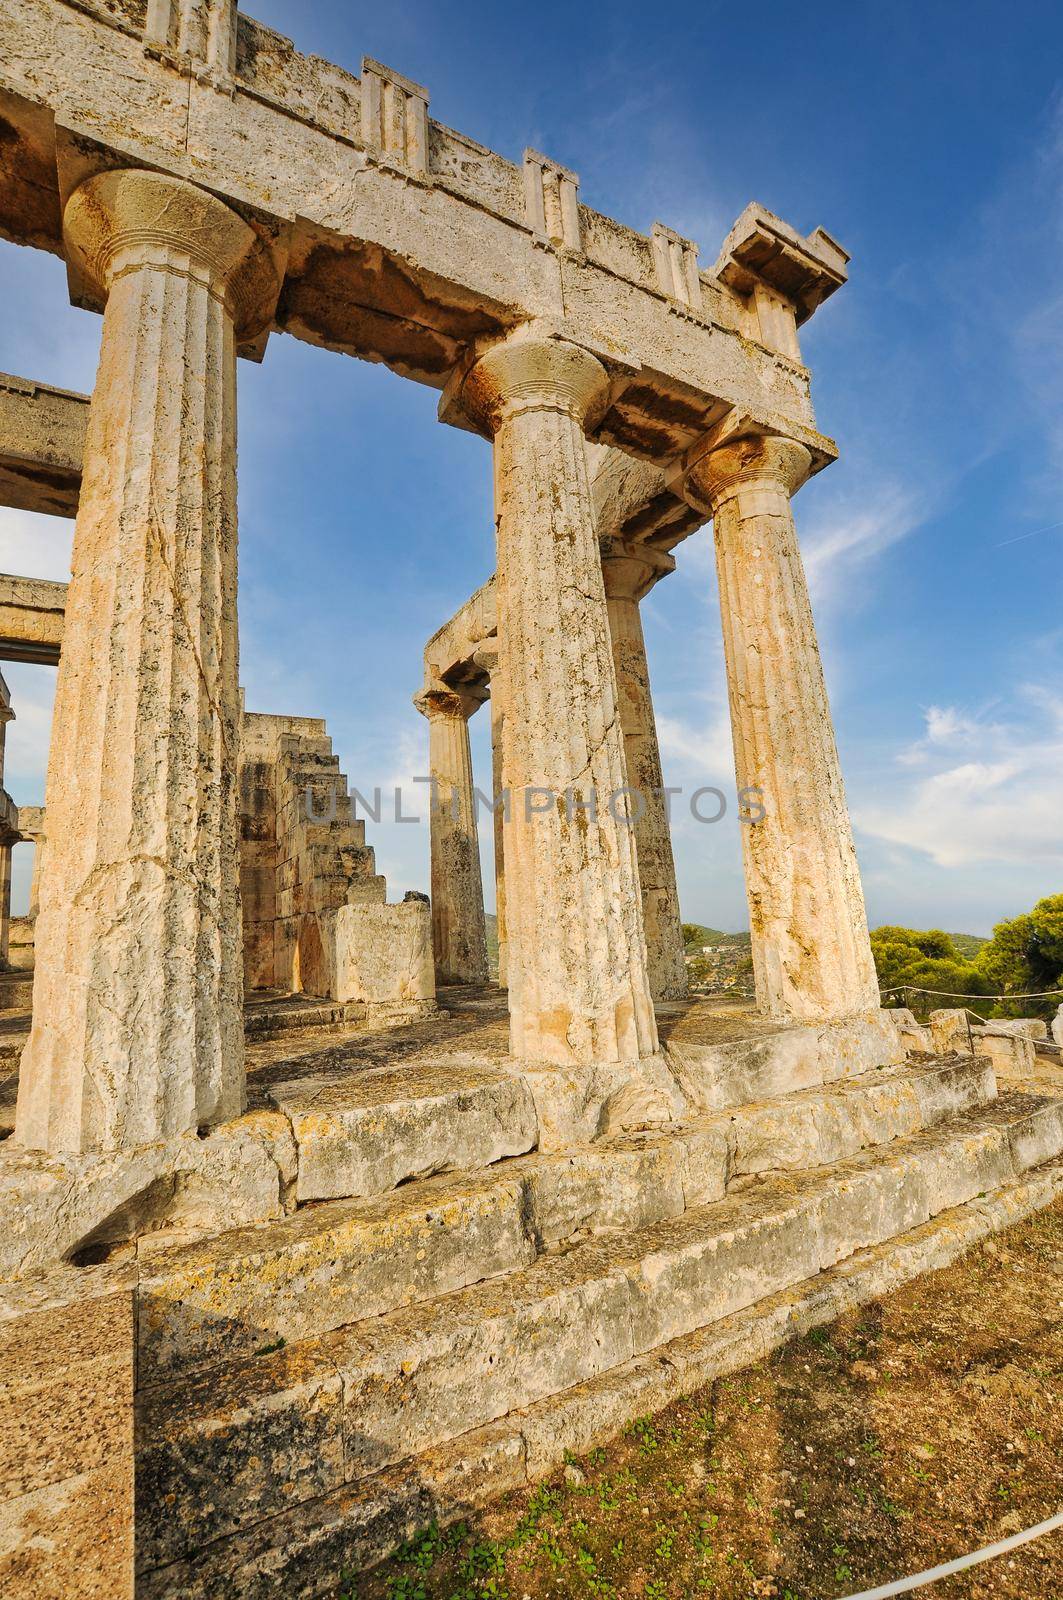 The ancient temple of Athena Aphaia in the Greek island of Aegina.